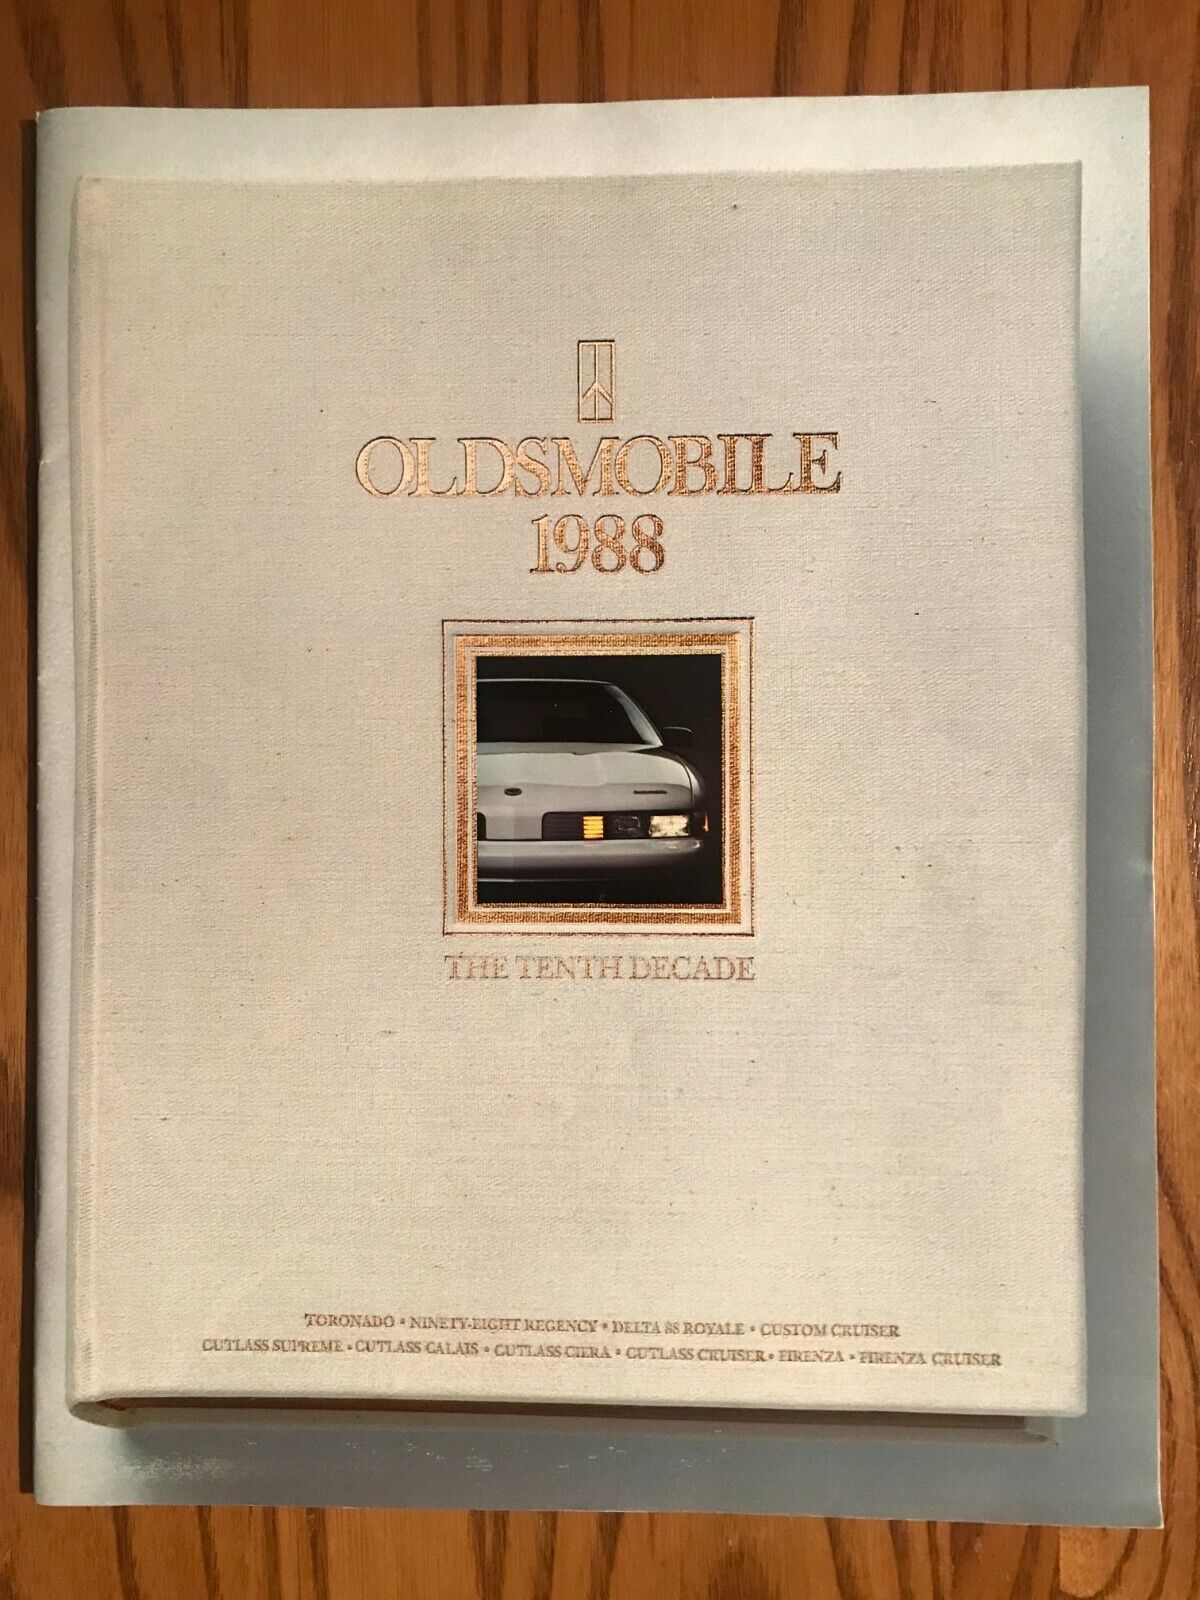 1988 Oldsmobile - Full-line Sales Brochure - The Tenth Decade - 32 Pages - Nice!